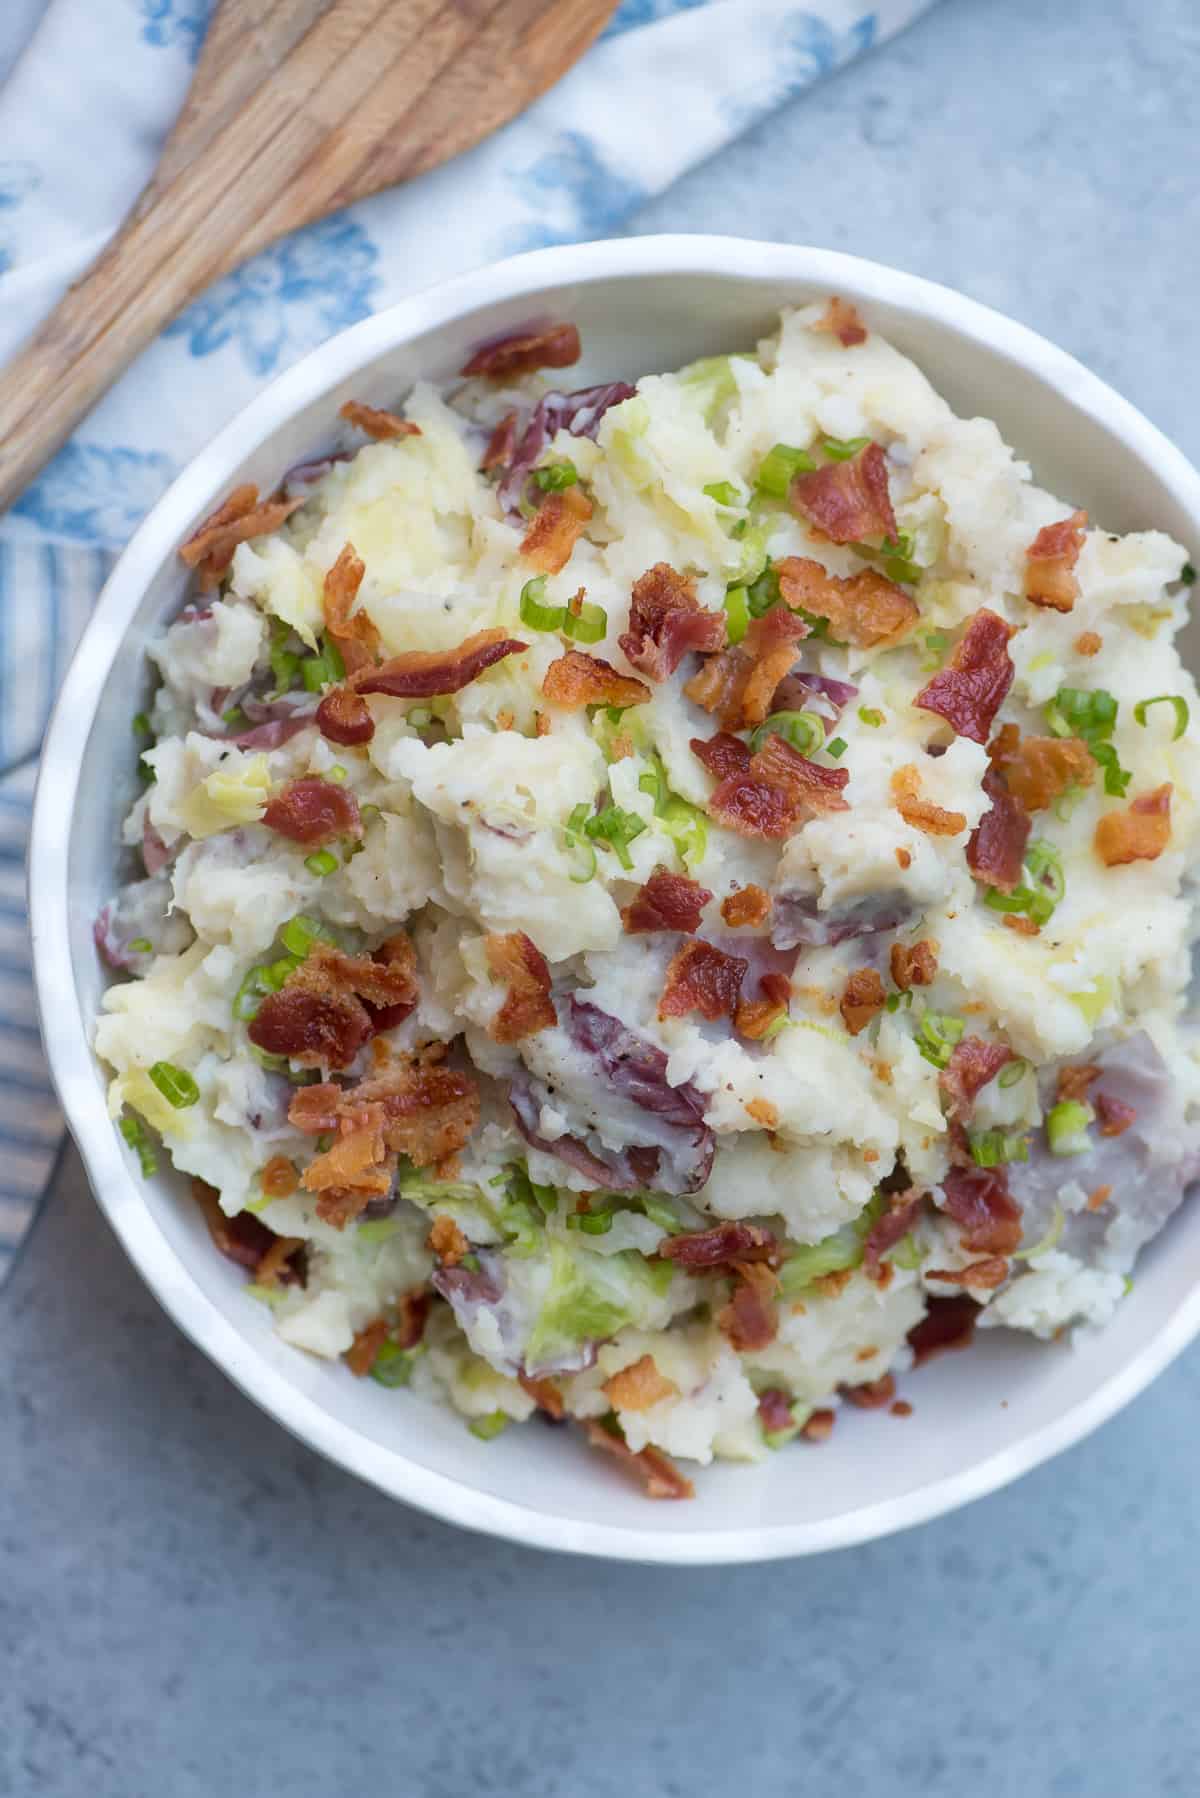 Mashed potatoes topped with bacon and green onions in a white bowl.